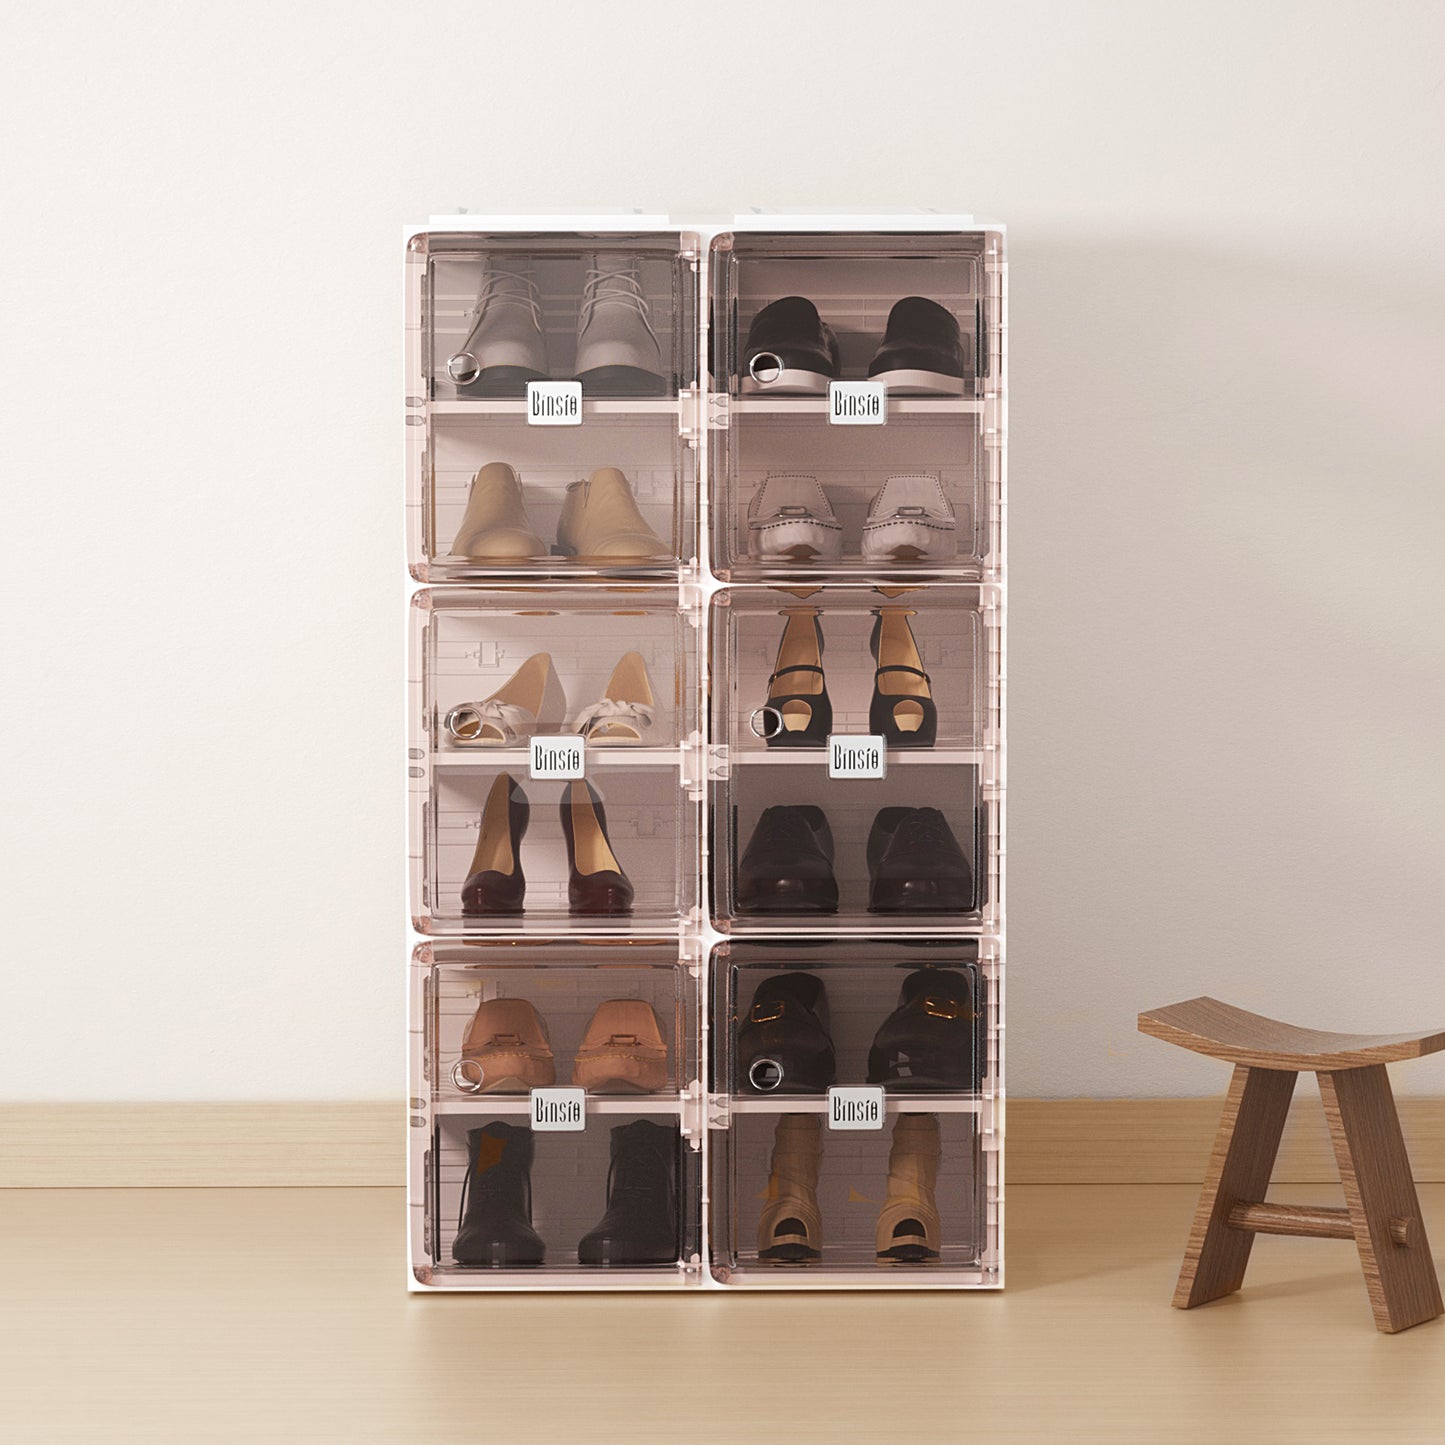 BINSIO Storage Organizer, Shoe Organizer for Closet / Entry Way, Foldable Shoe Rack Organizer with Visible Door, Fast Easy Assemble Shoe Boxes Cabinet, Reusable Slipper Holders, Durable Plastic Shoe Storage with Bronze Panel-6 Tiers